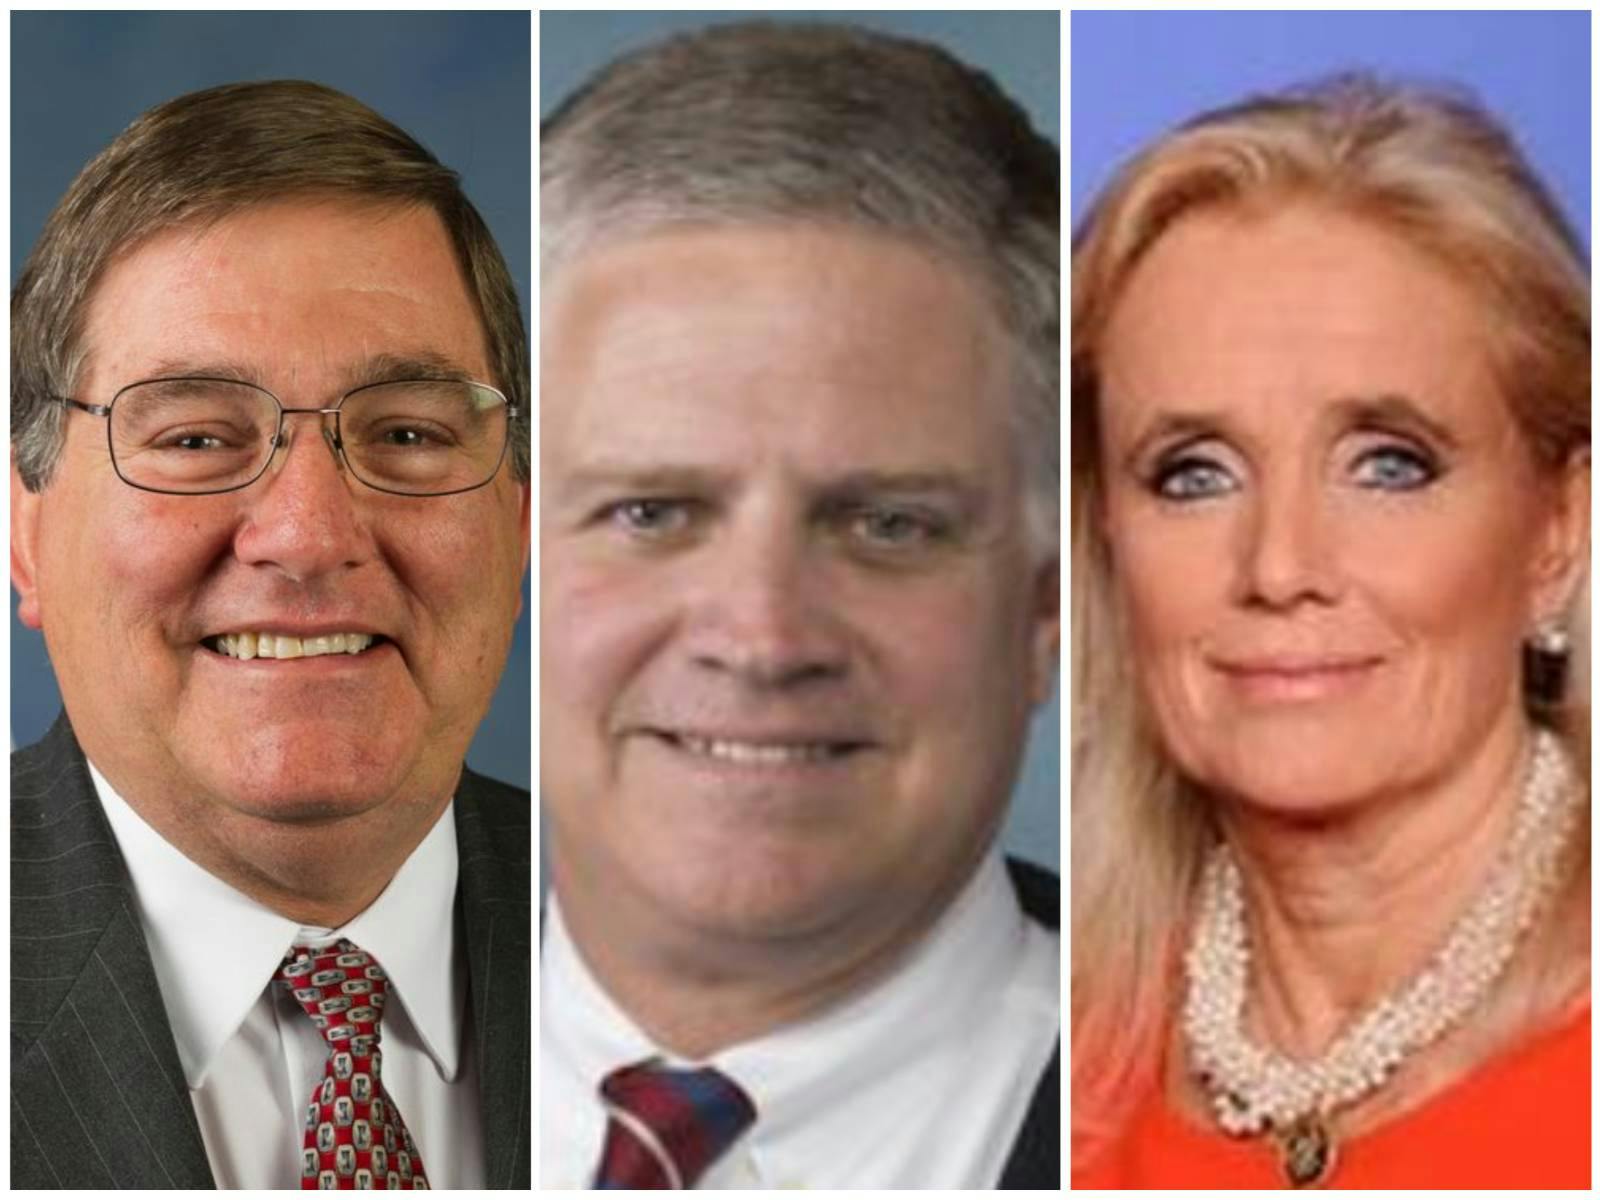 From left, Reps. Michael Burgess, R-Texas; Drew Ferguson, R-Ga.; and Debbie Dingell, D-Mich. (Images from Congress)